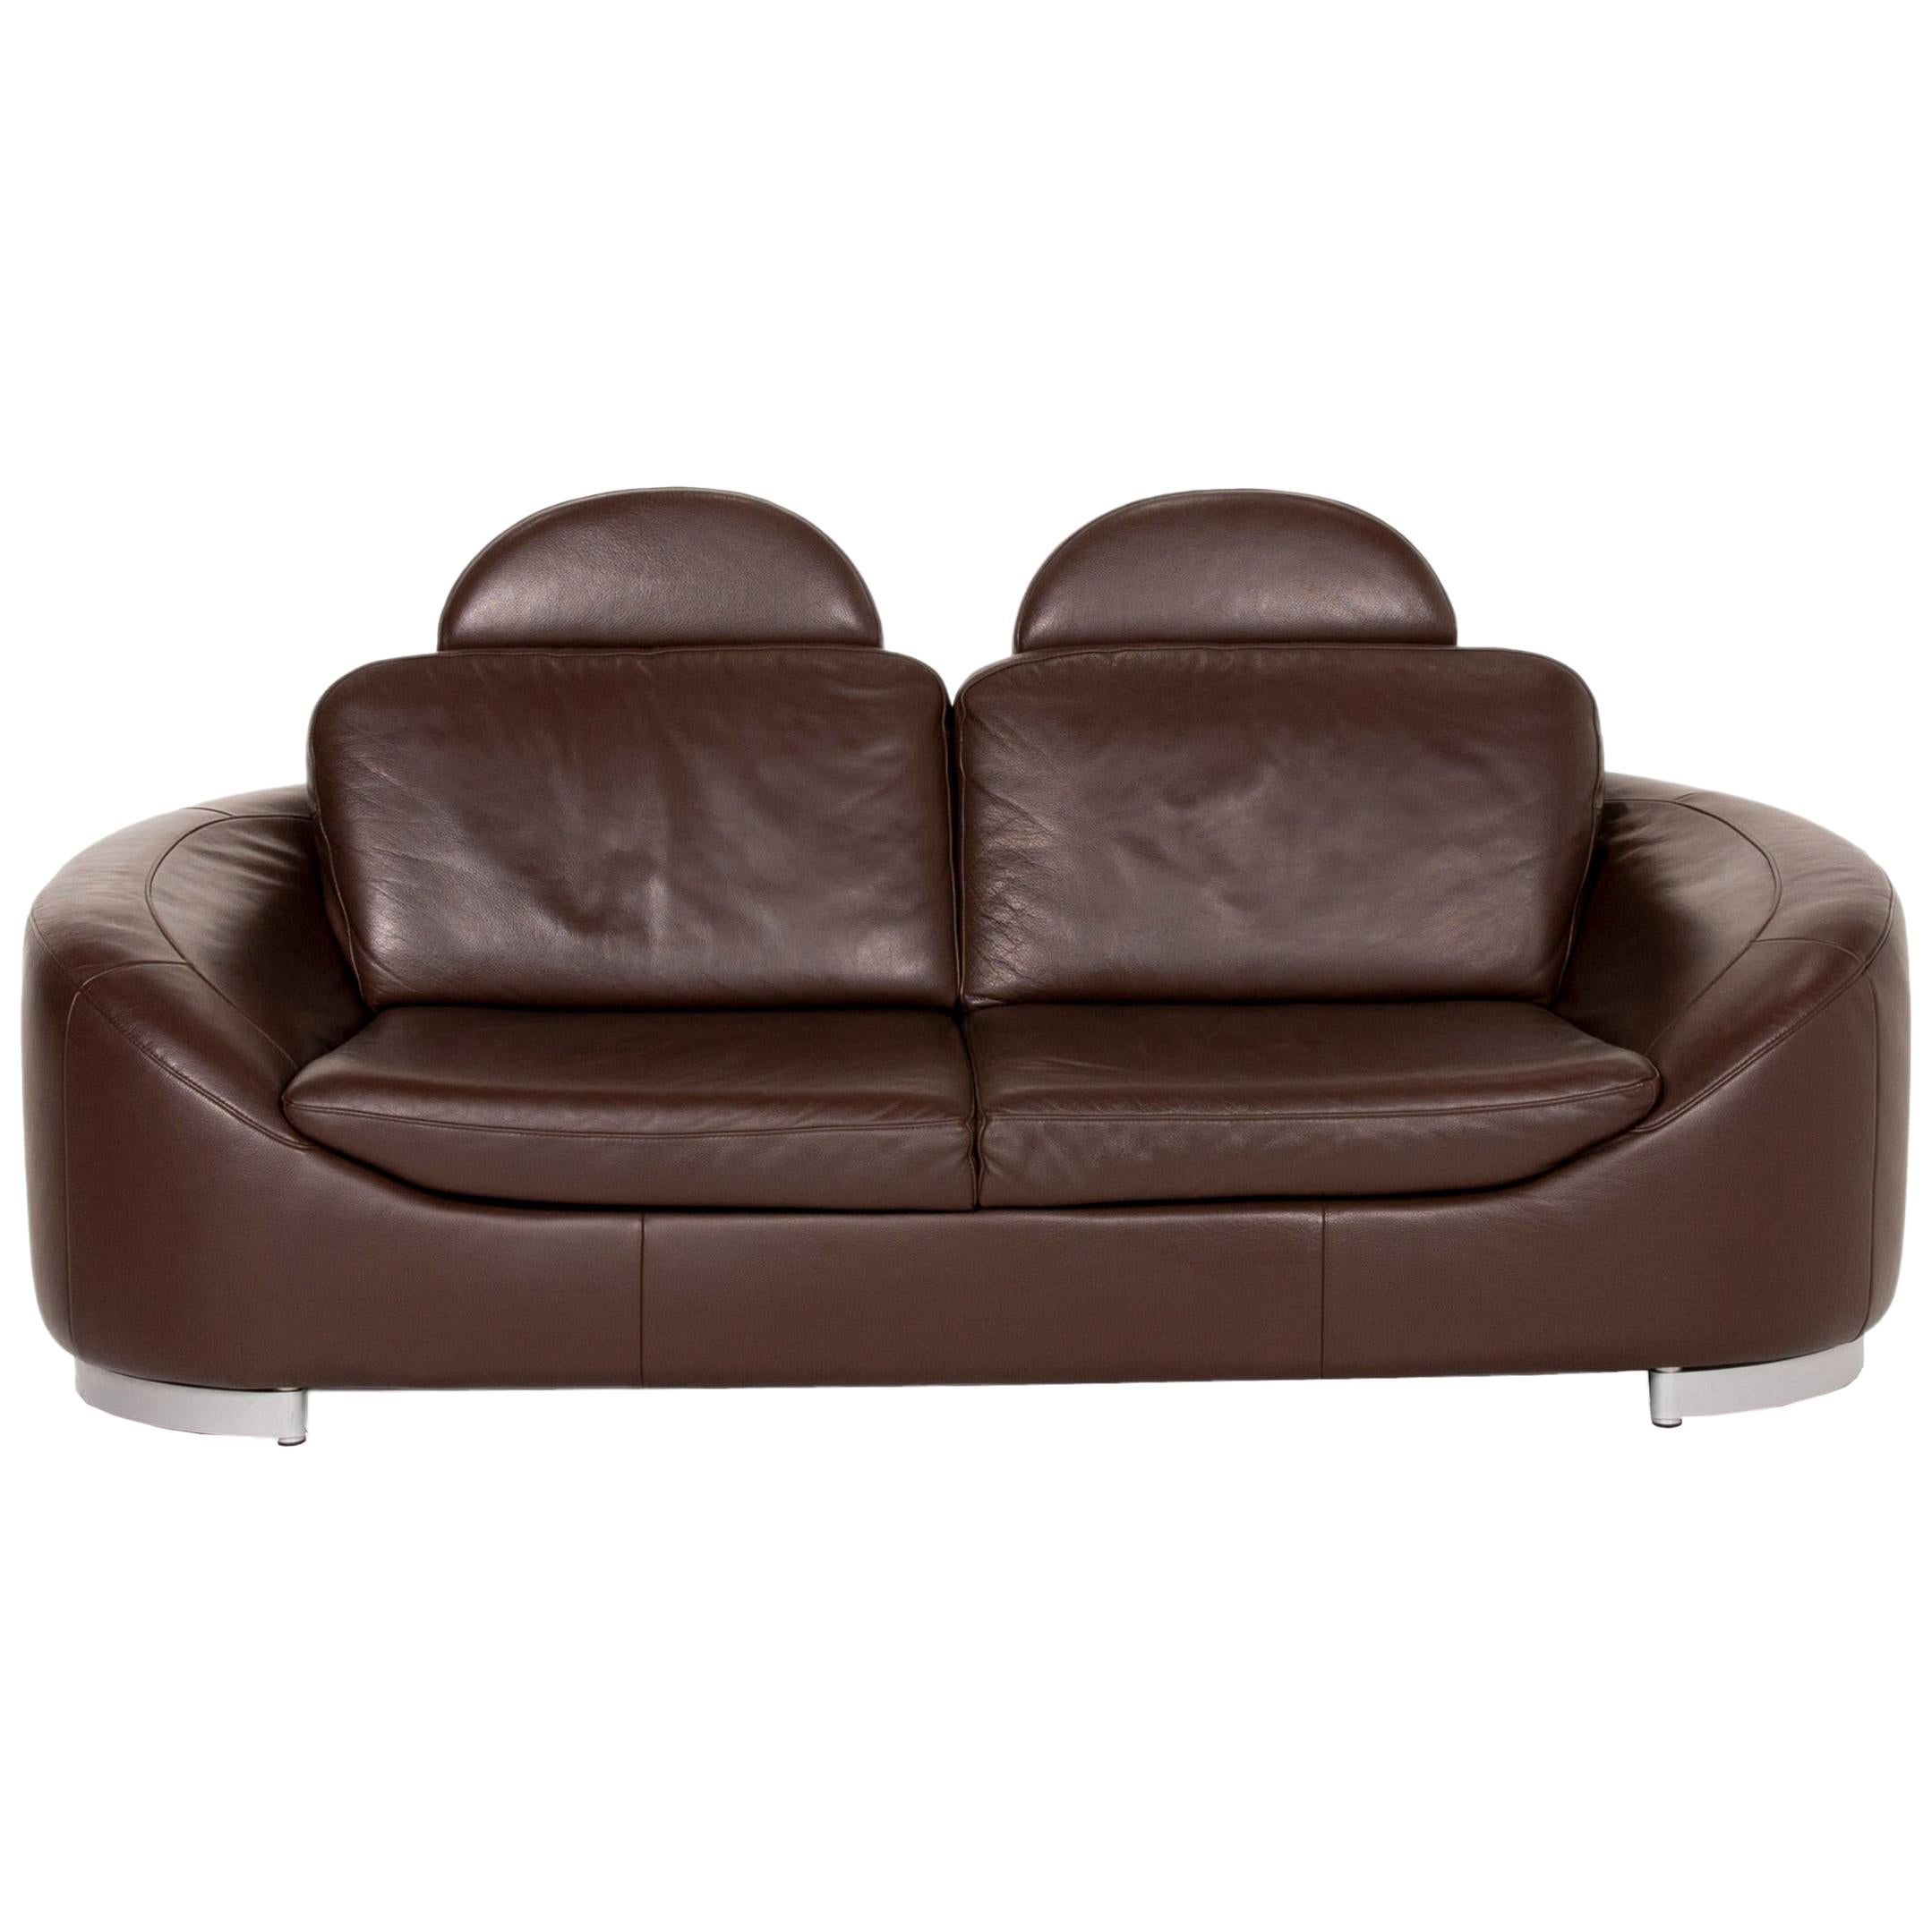 Ewald Schillig Leather Sofa Brown Dark Brown Two-Seater Couch For Sale